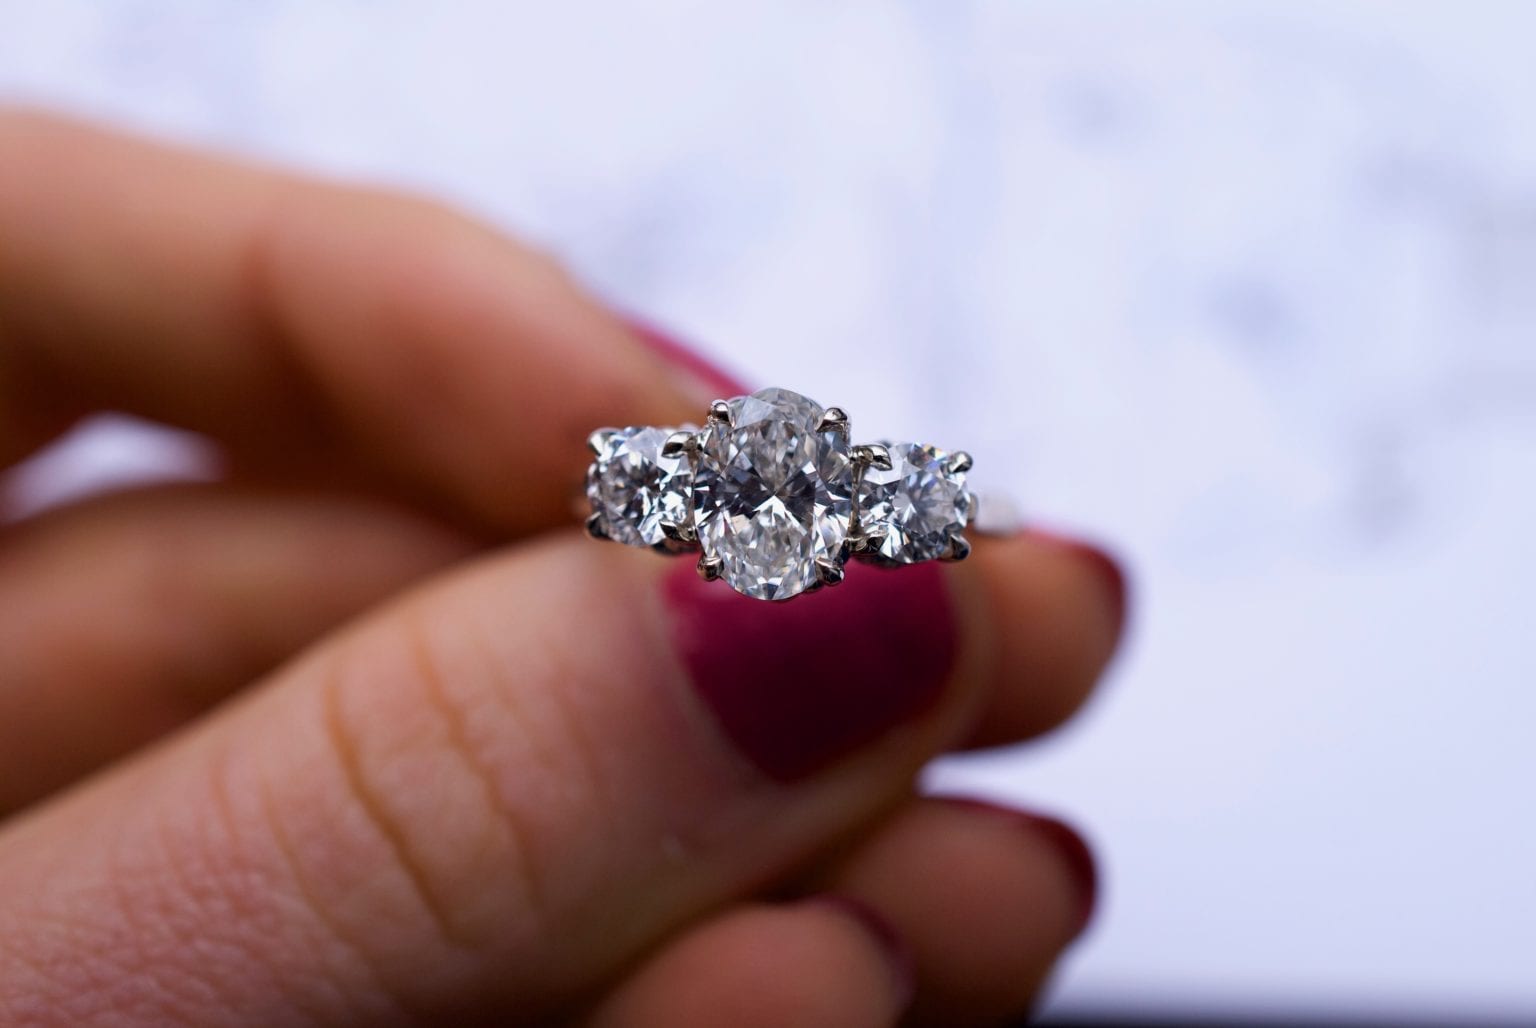 How To Clean Your Engagement Ring at Home